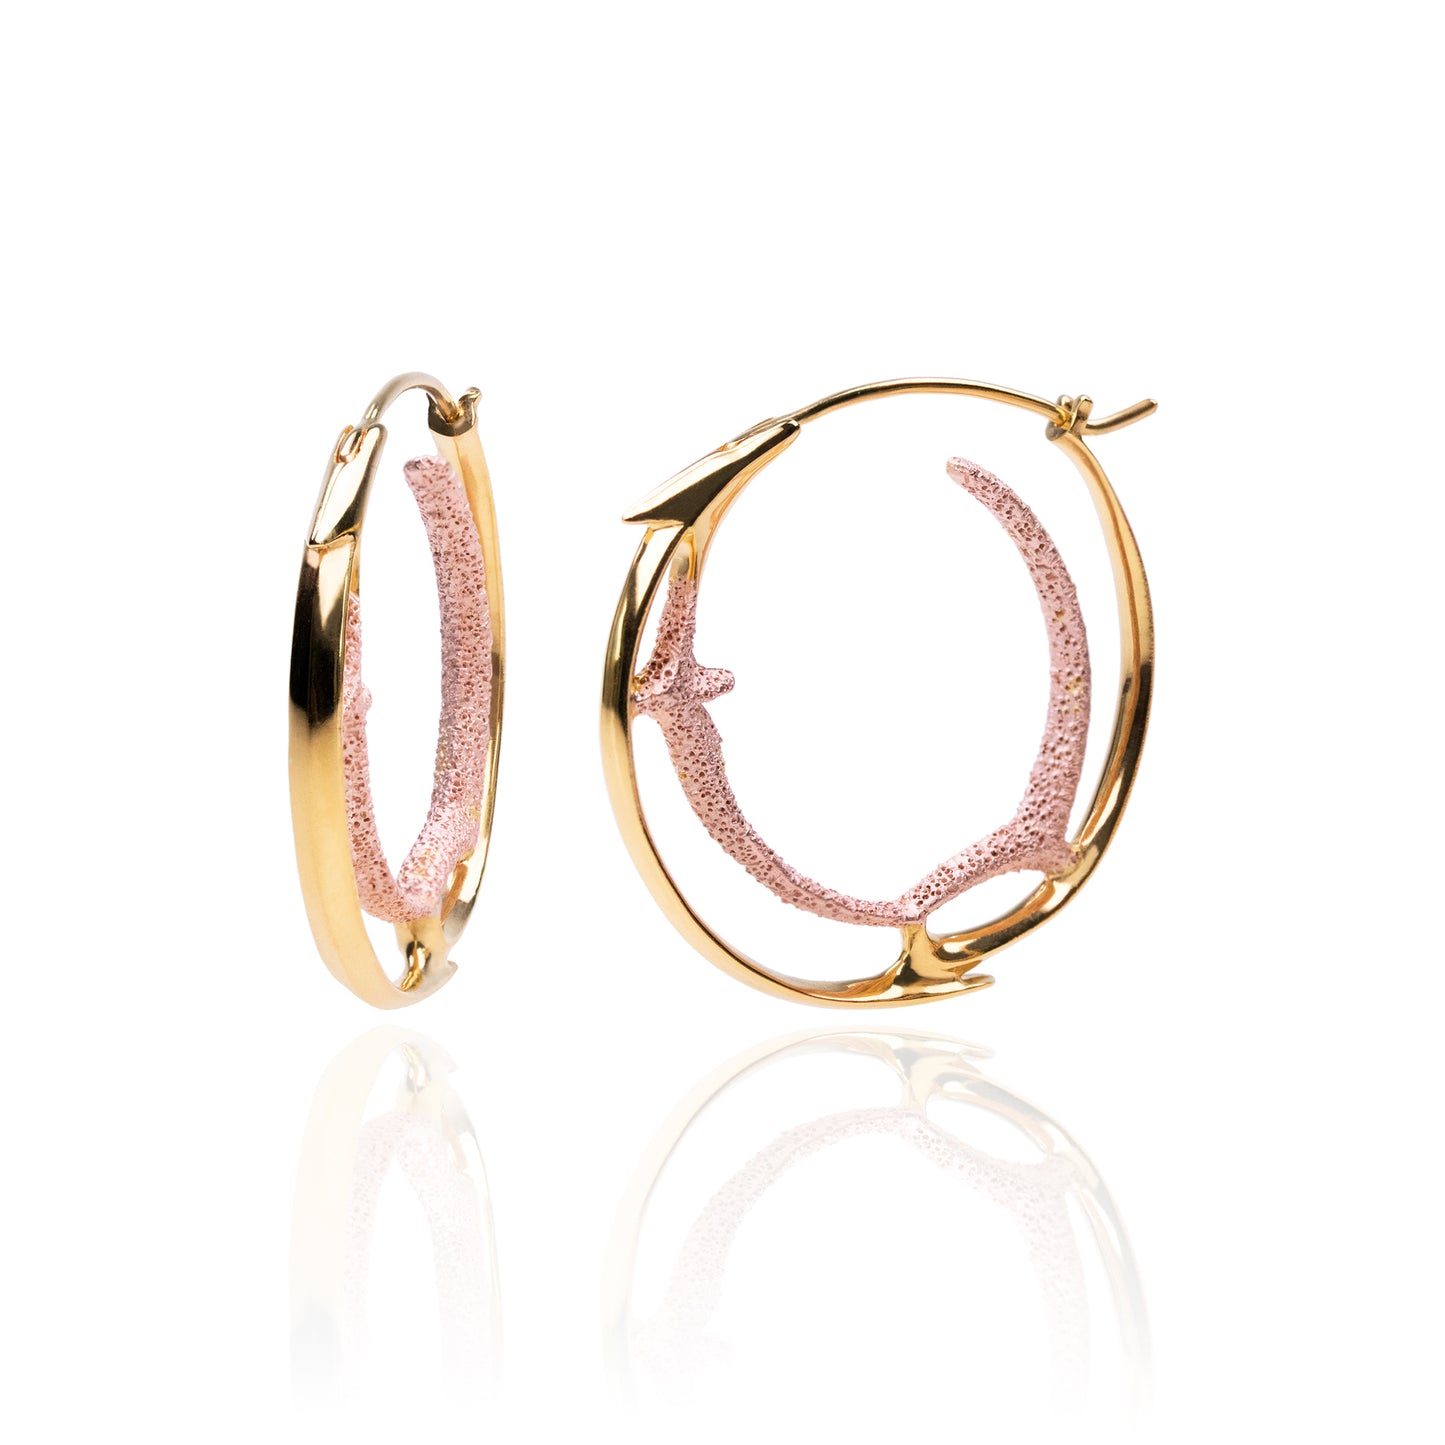 Orme-Brown Contemporary Fine Jewellery ethical medium everyday Sunset hoop earrings in sustainable recycled silver with gold plating